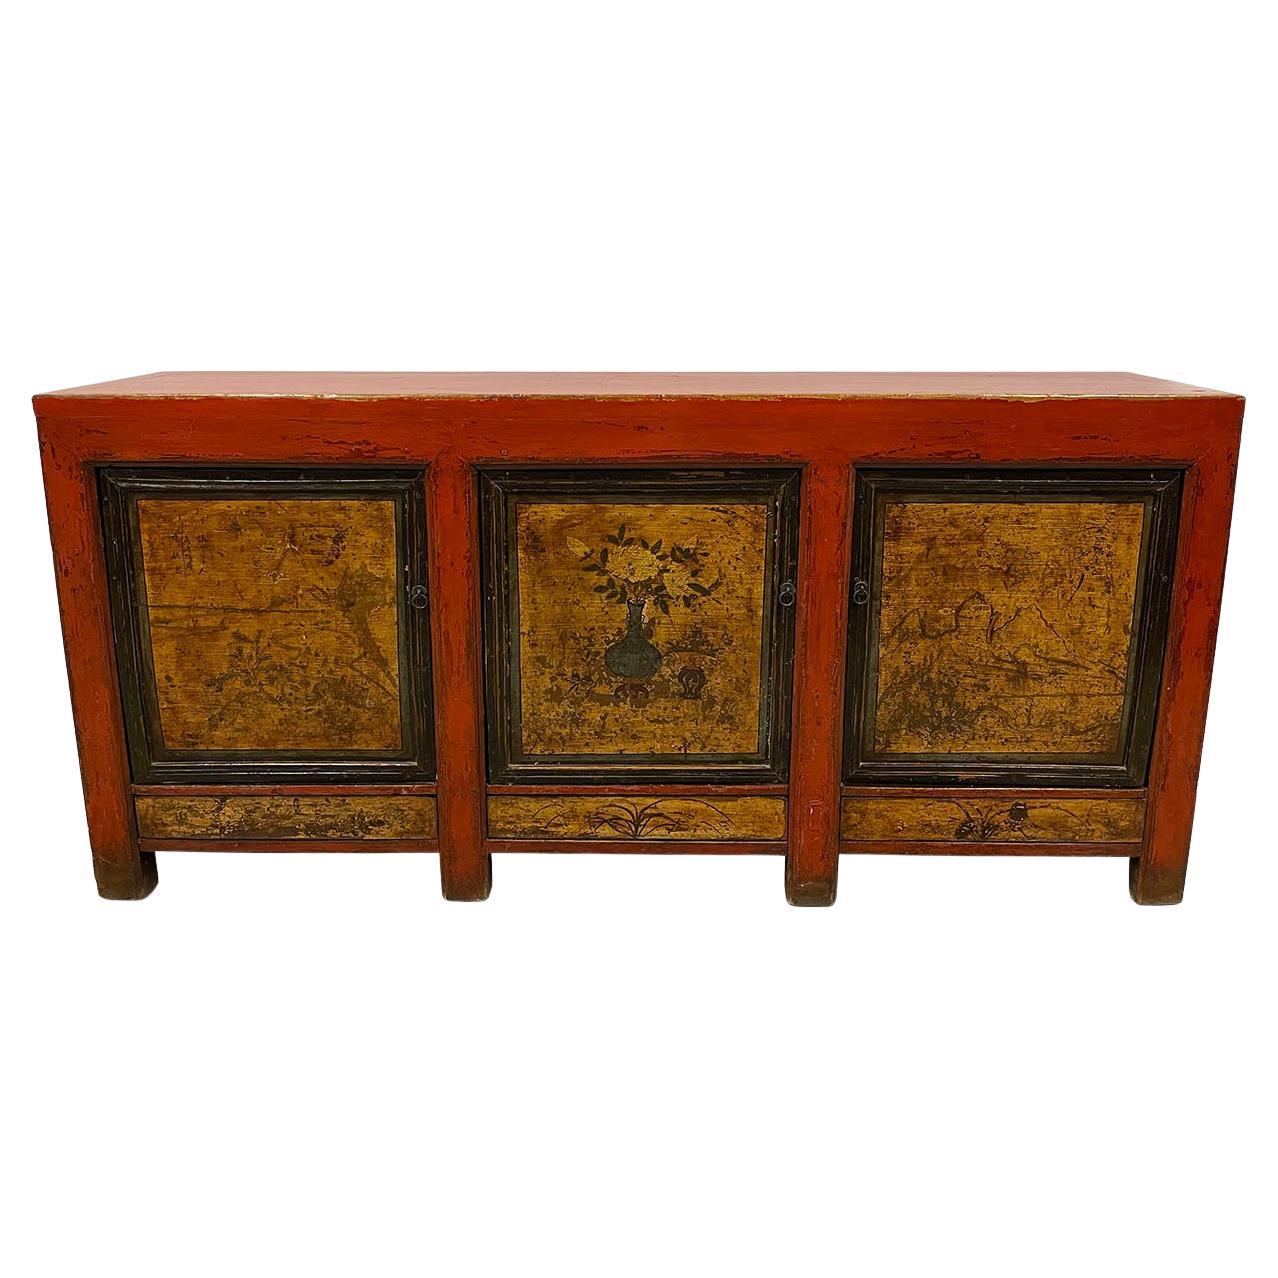 Late 19th Century Antique Chinese Mongolia Credenza, Sideboard, Buffet Table For Sale